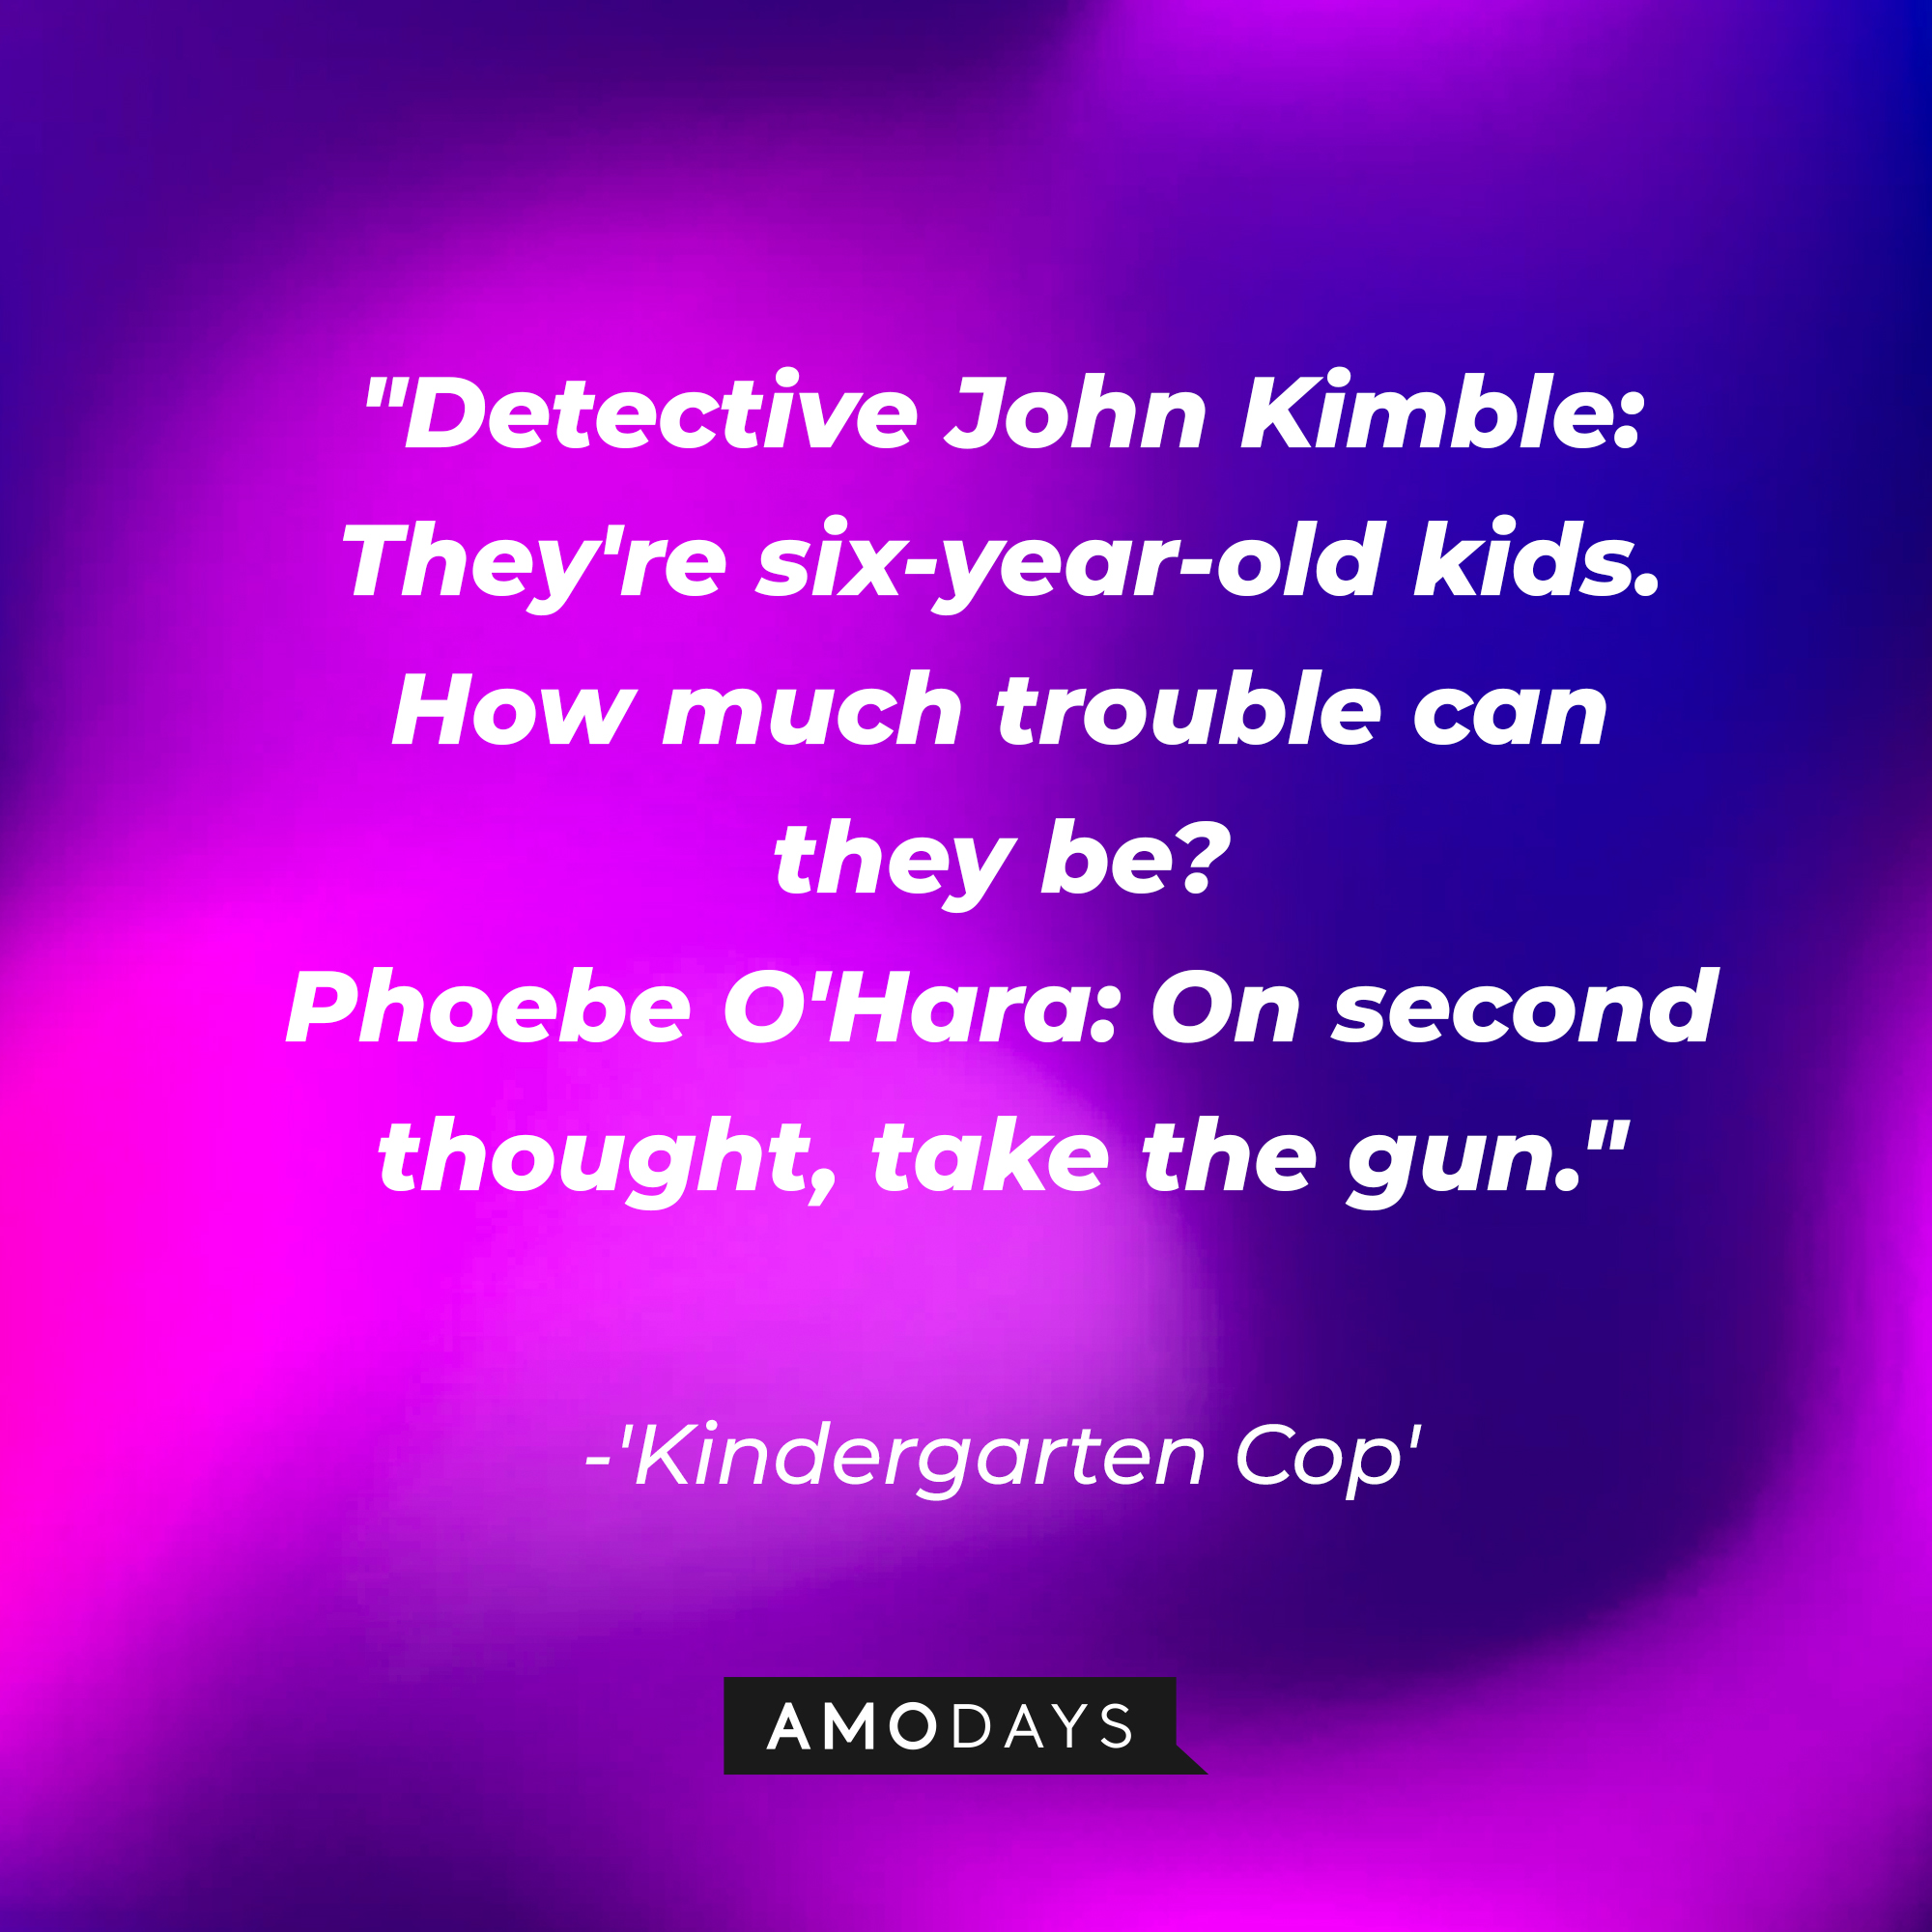 Detective John Kimble and Phoebe O'Hara's dialogue in "Kindergarten Cop:" "Detective John Kimble: They're six-year-old kids. How much trouble can they be? ; Phoebe O'Hara: On second thought, take the gun." | Source: AmoDays